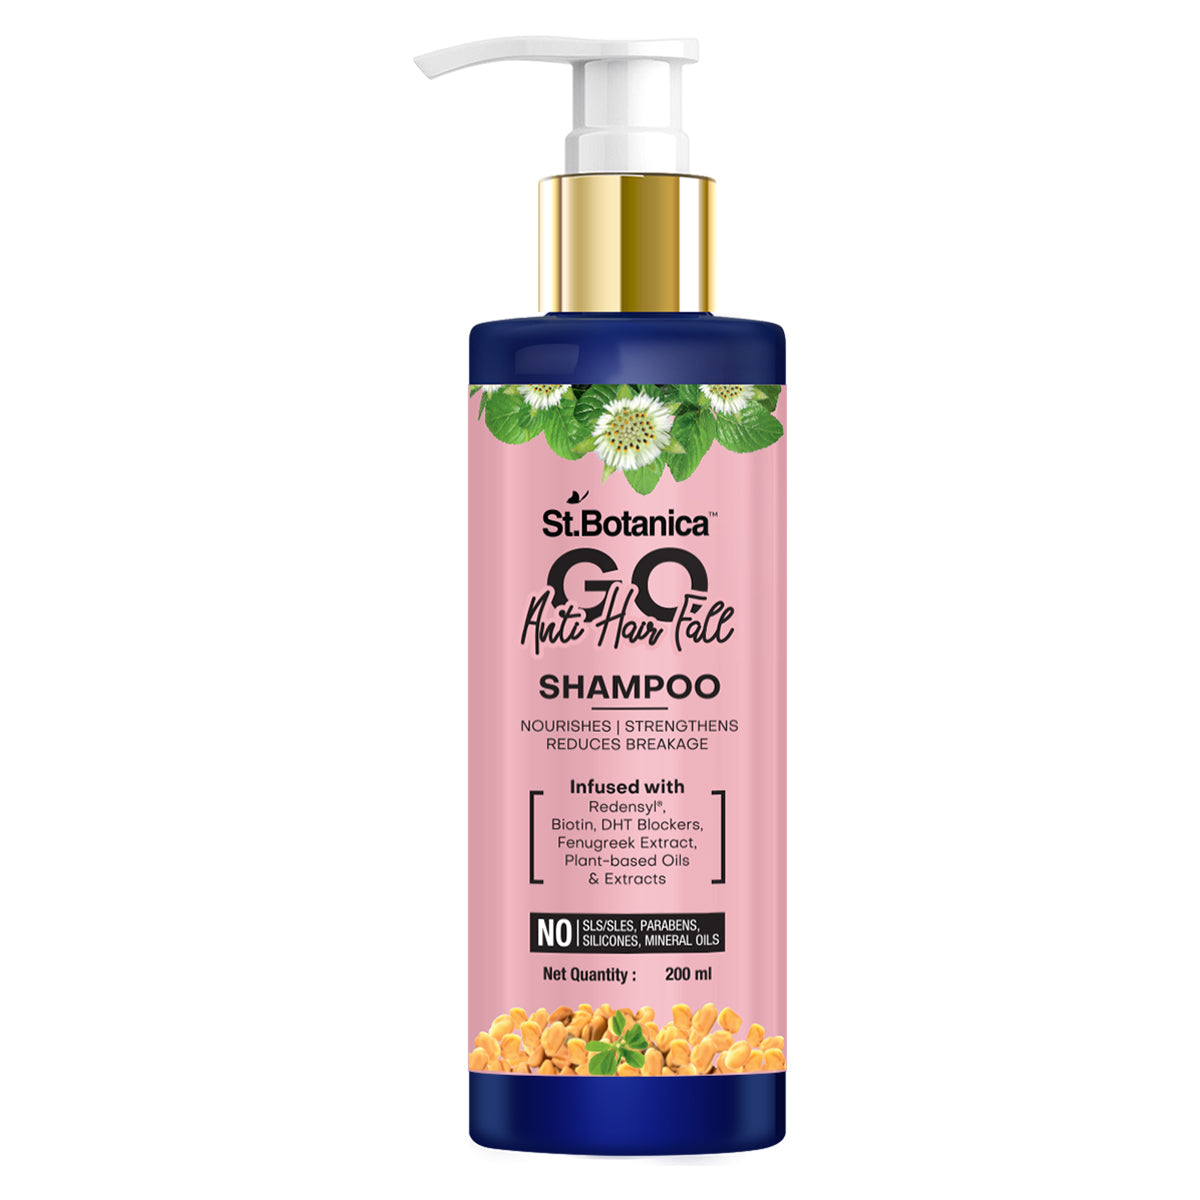 St.Botanica GO Anti-Hair Fall Hair Shampoo - With Redensyl, Biotin, Natural DHT Blockers, No SLS/Sulphate, Paraben, Silicones, Colors, 200ml